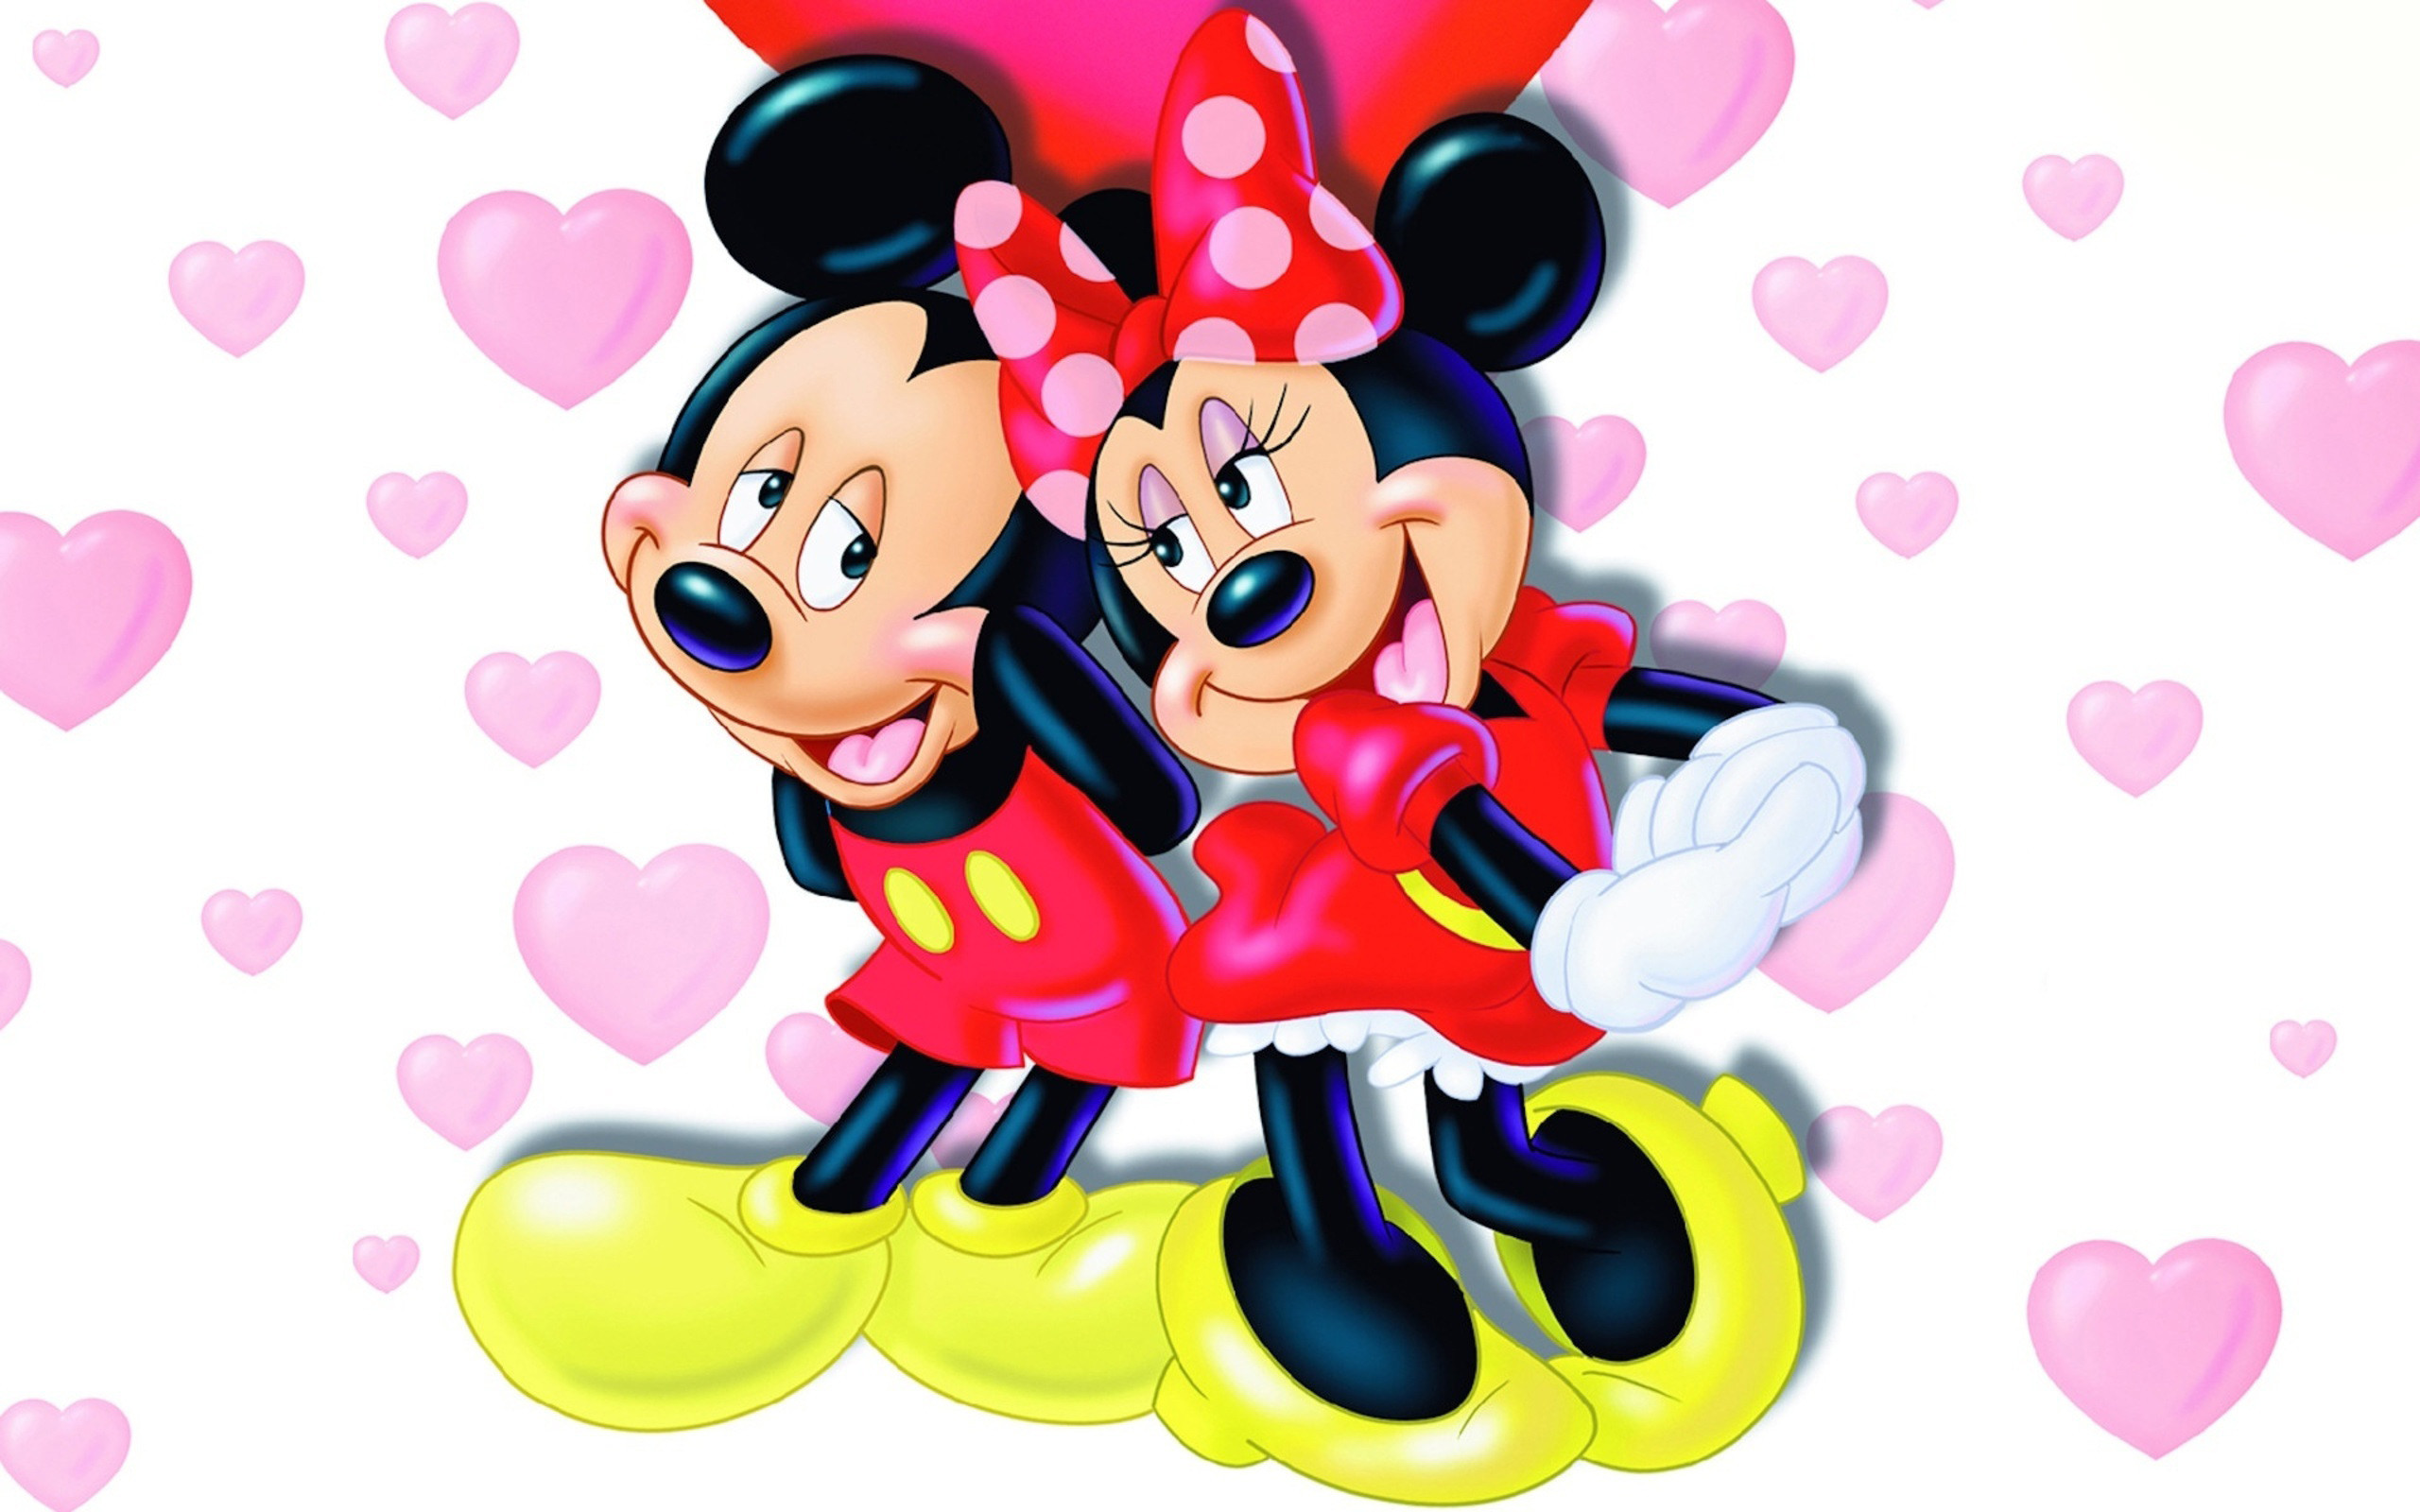 ♡ Be Positive ♡ — MINNIE MOUSE WALLPAPERS